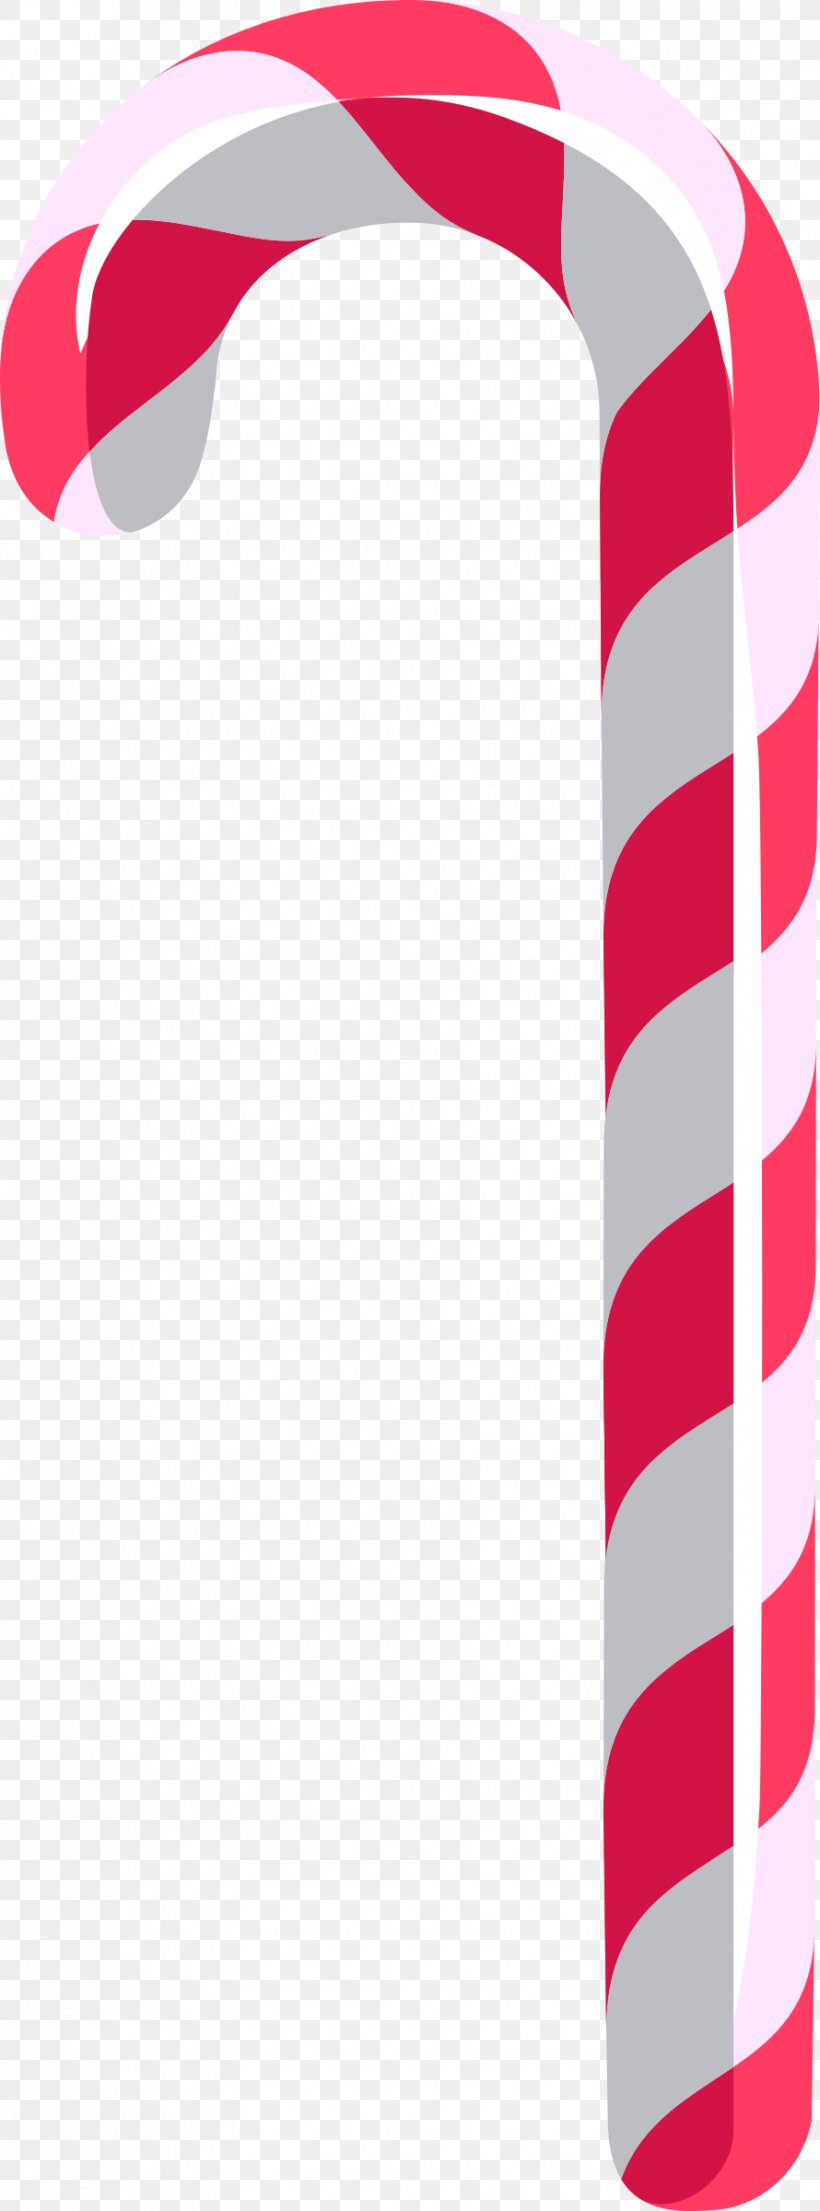 Candy Cane Stick Candy Drawing Clip Art, PNG, 890x2400px, Candy Cane, Candy, Caramel, Christmas, Drawing Download Free